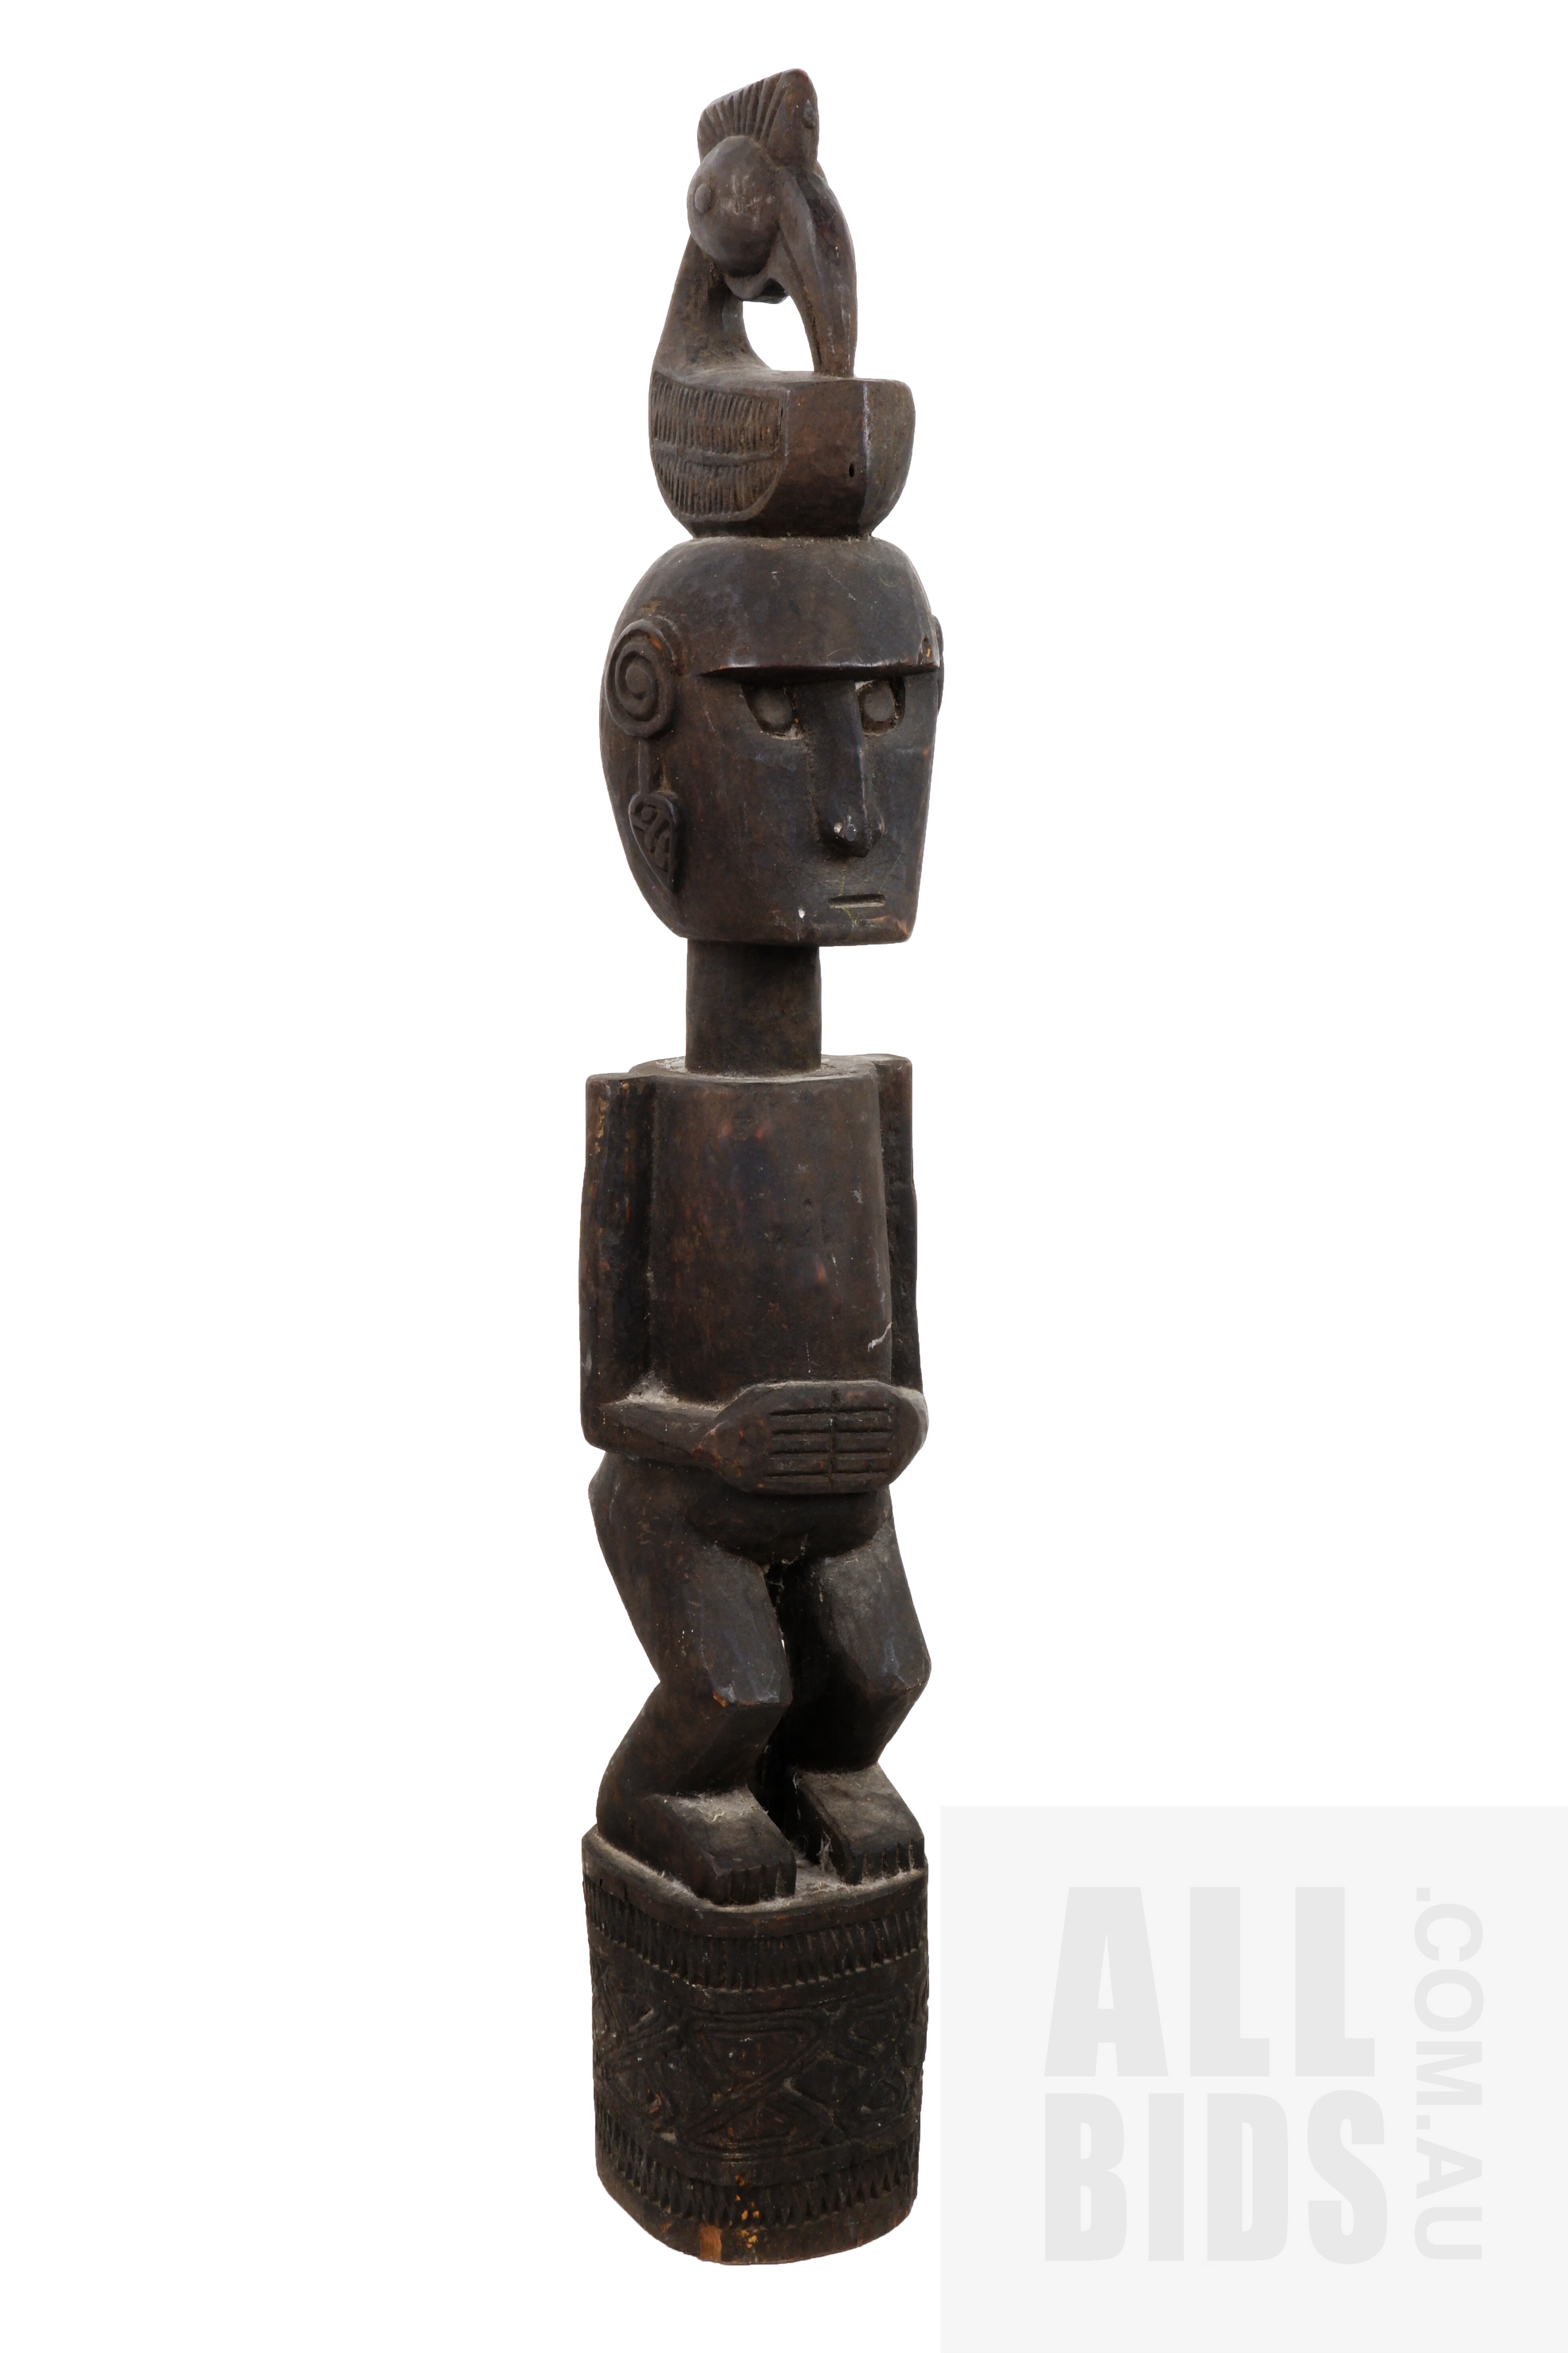 'Tall Carved and Painted Hardwood Ancestral Figure From PNG or Indonesia, Circa 1930-40s'